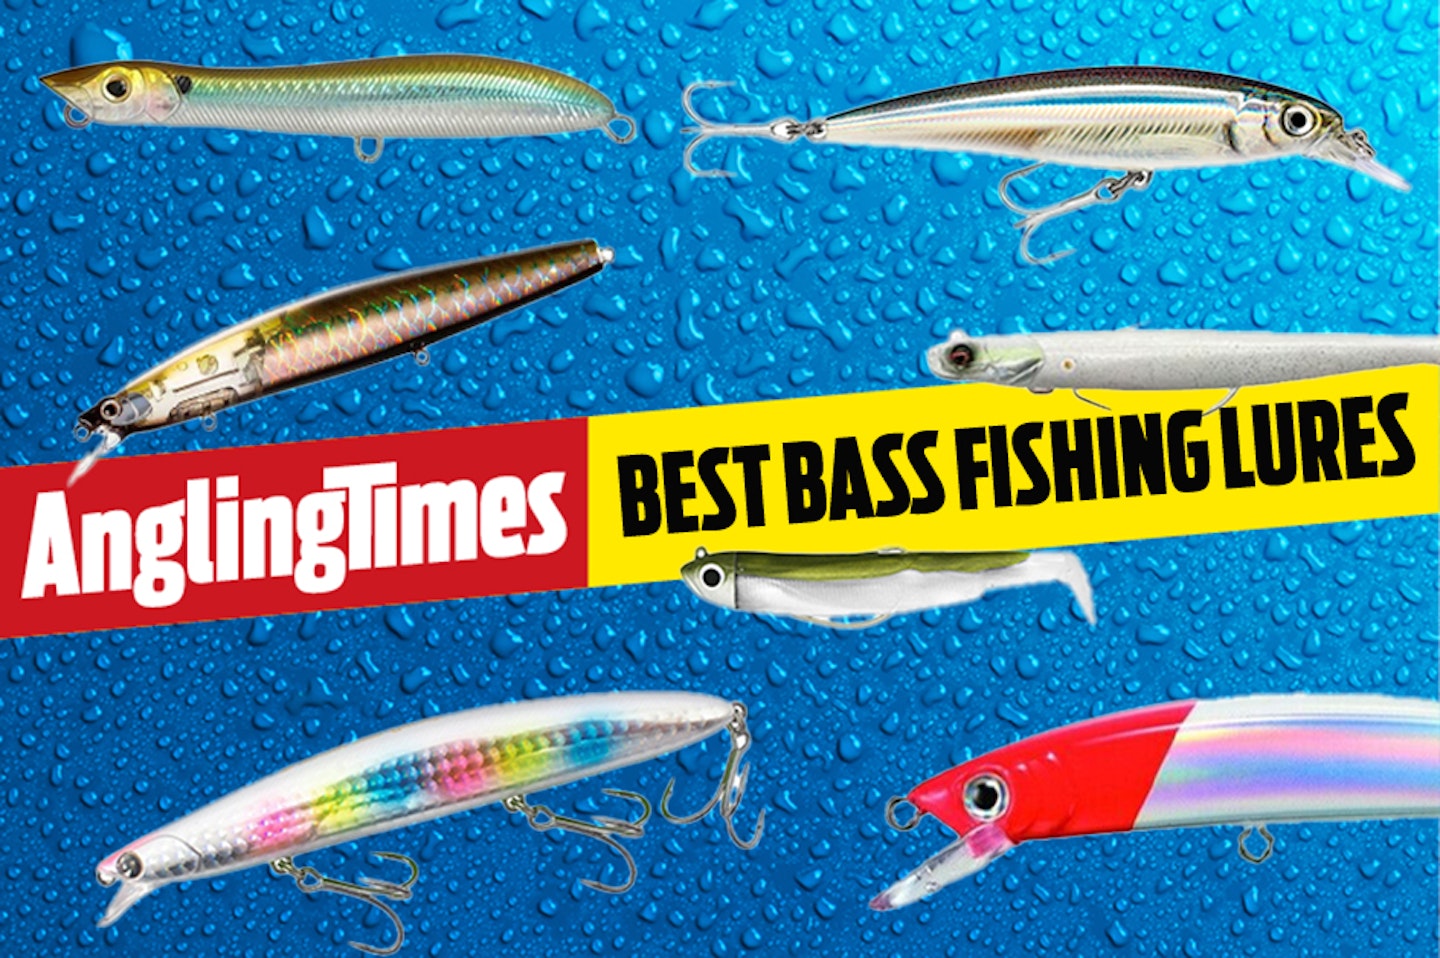 The best bass lures for shore fishing | Angling Times